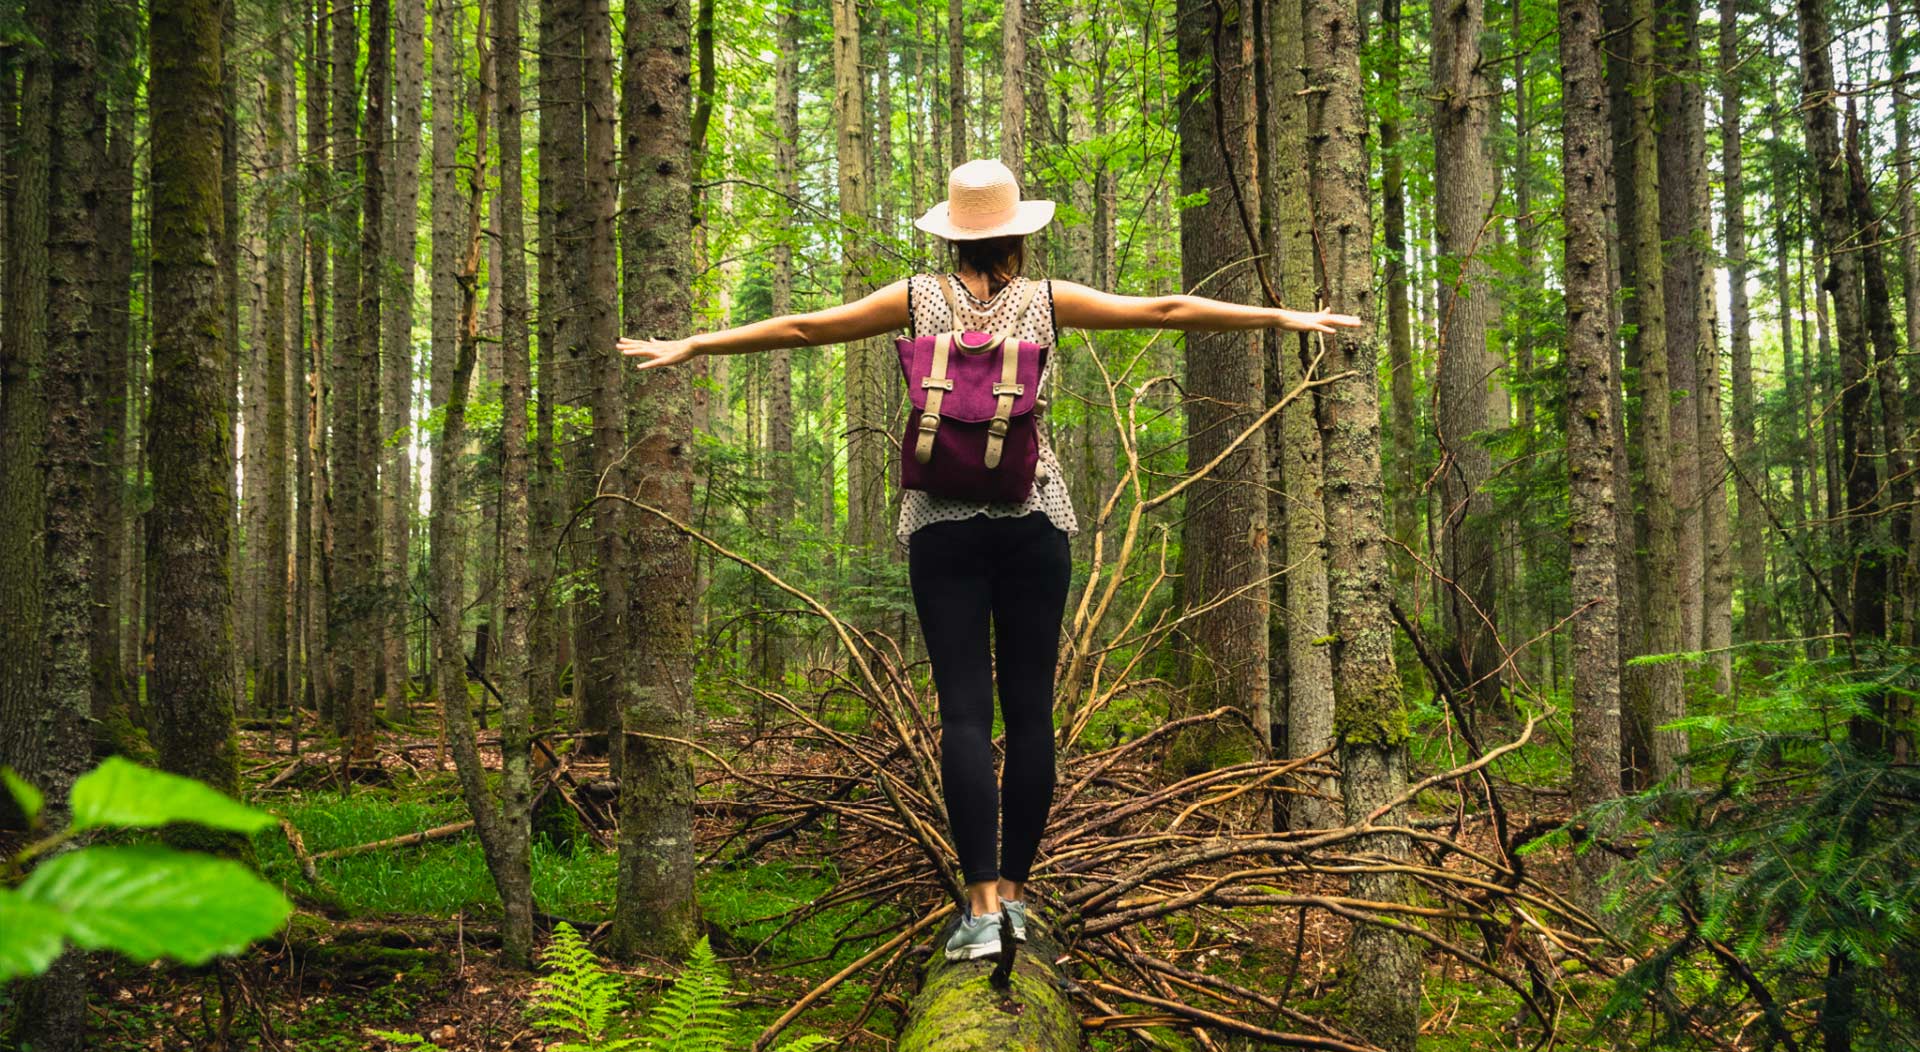 Woman balancing on a fallen tree log in a green forest, representing the balance the ECS provides.